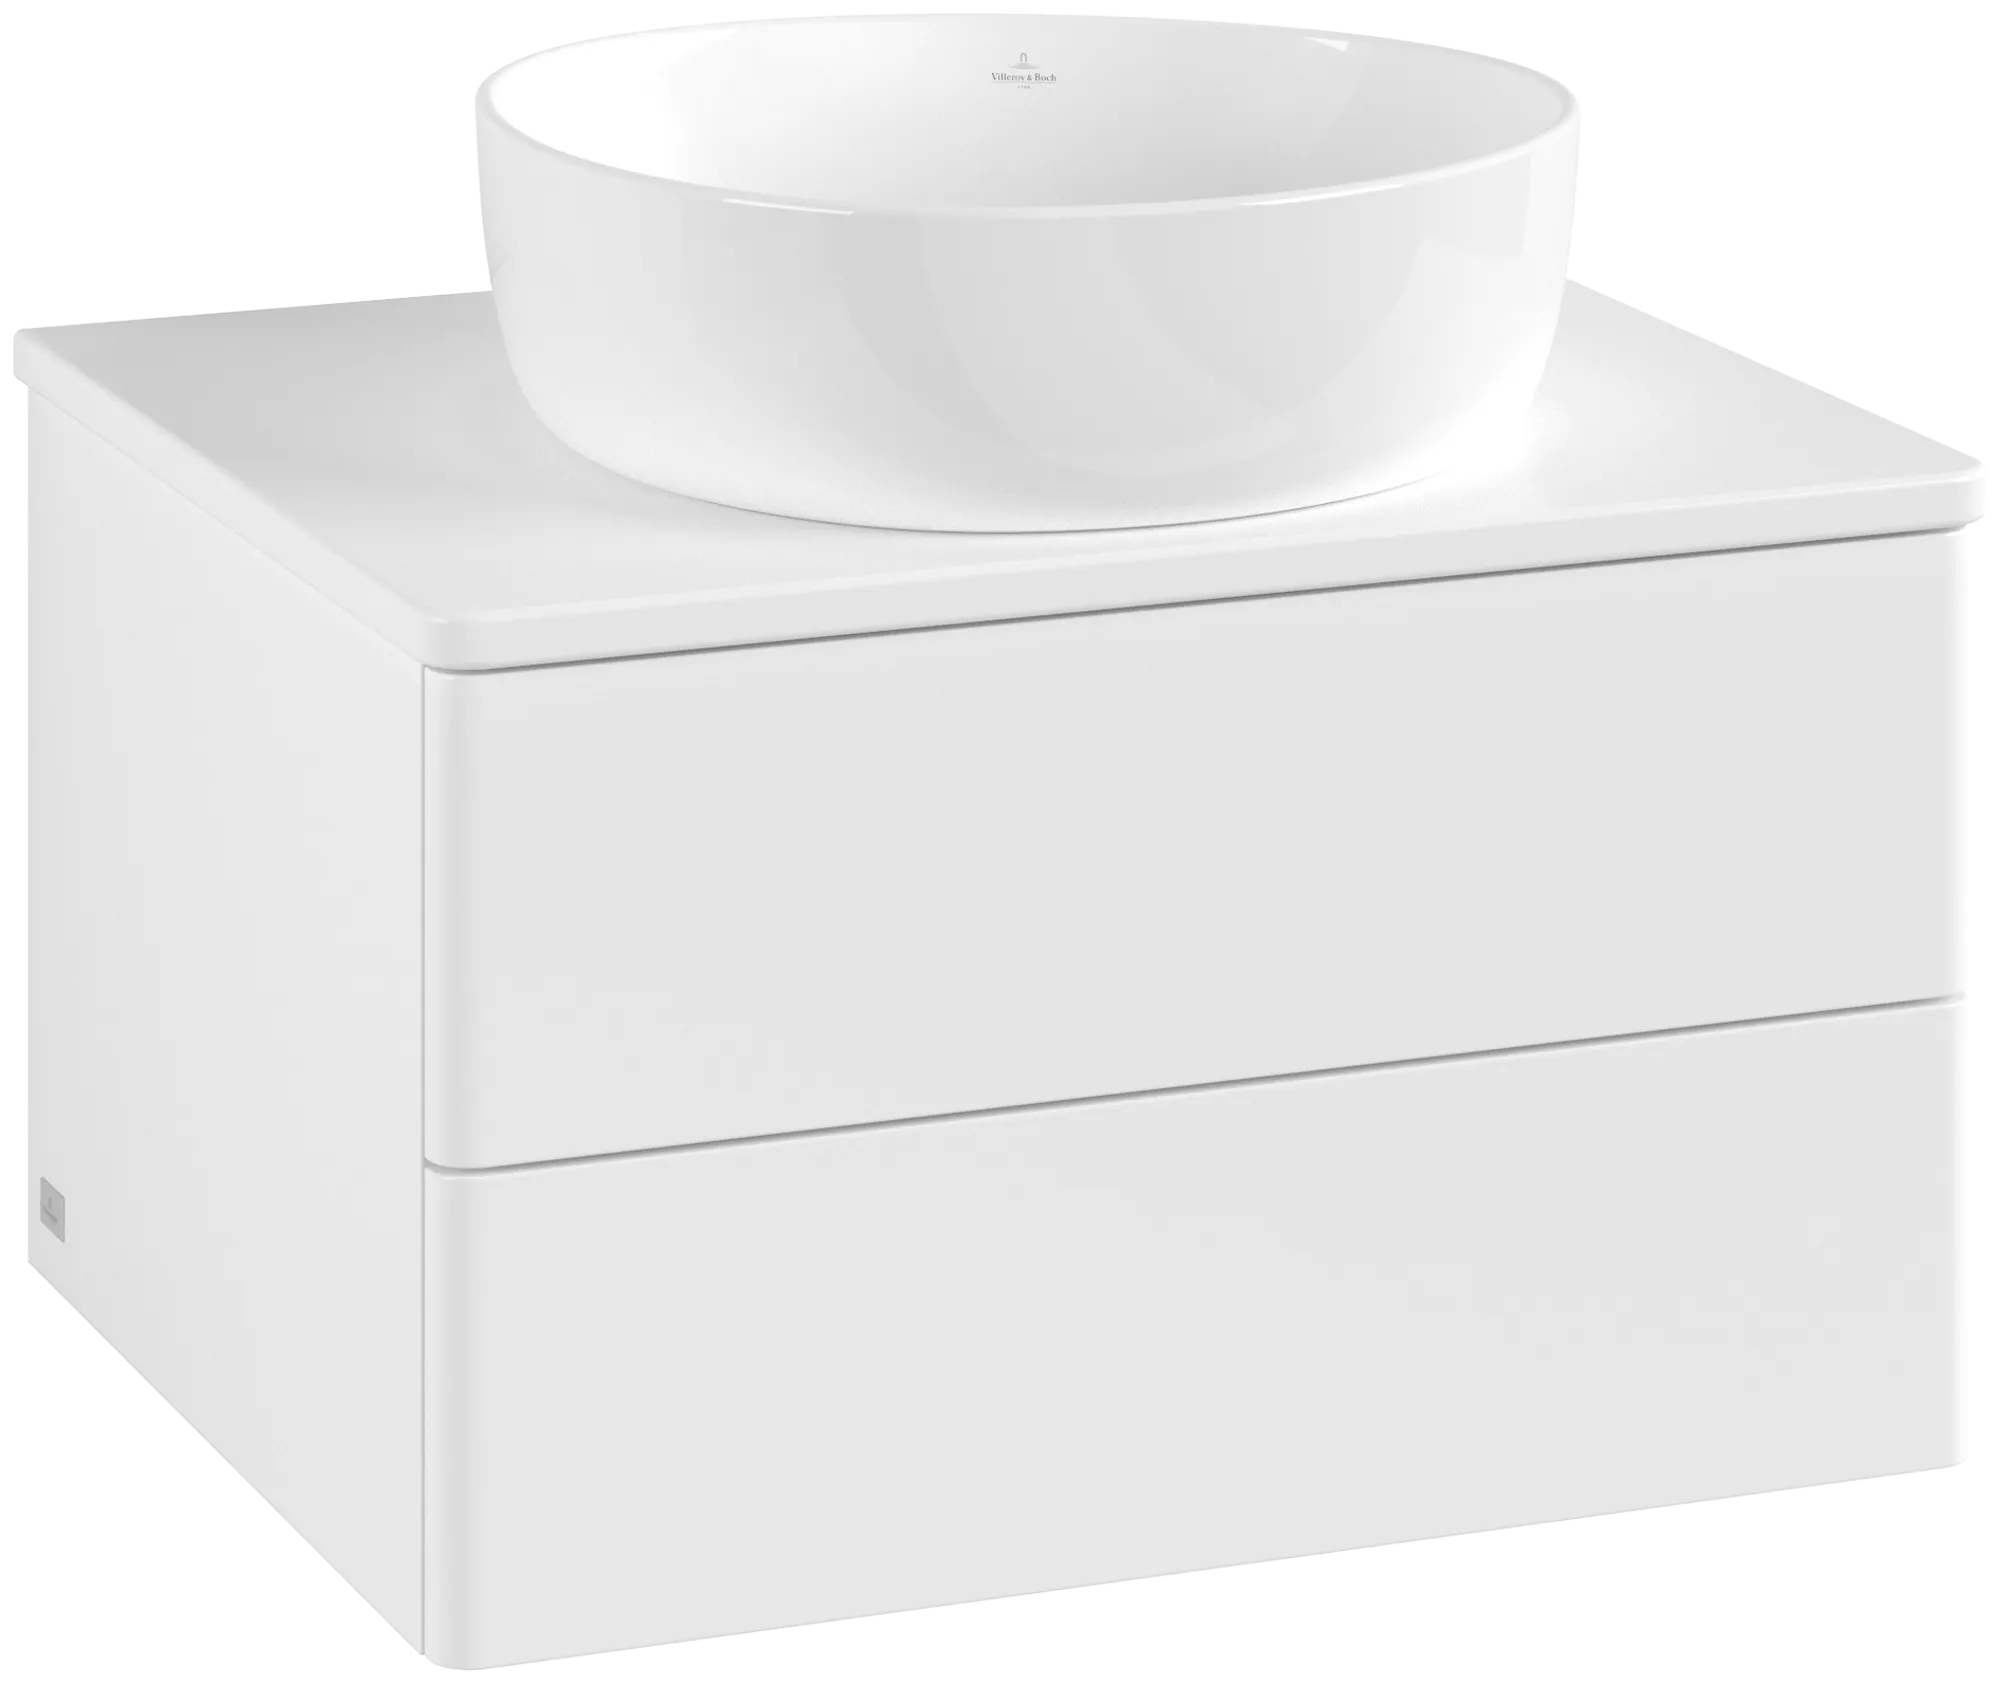 Picture of VILLEROY BOCH Antao Vanity unit, with lighting, 2 pull-out compartments, 600 x 360 x 500 mm, Front without structure, White Matt Lacquer / White Matt Lacquer #L18050MT